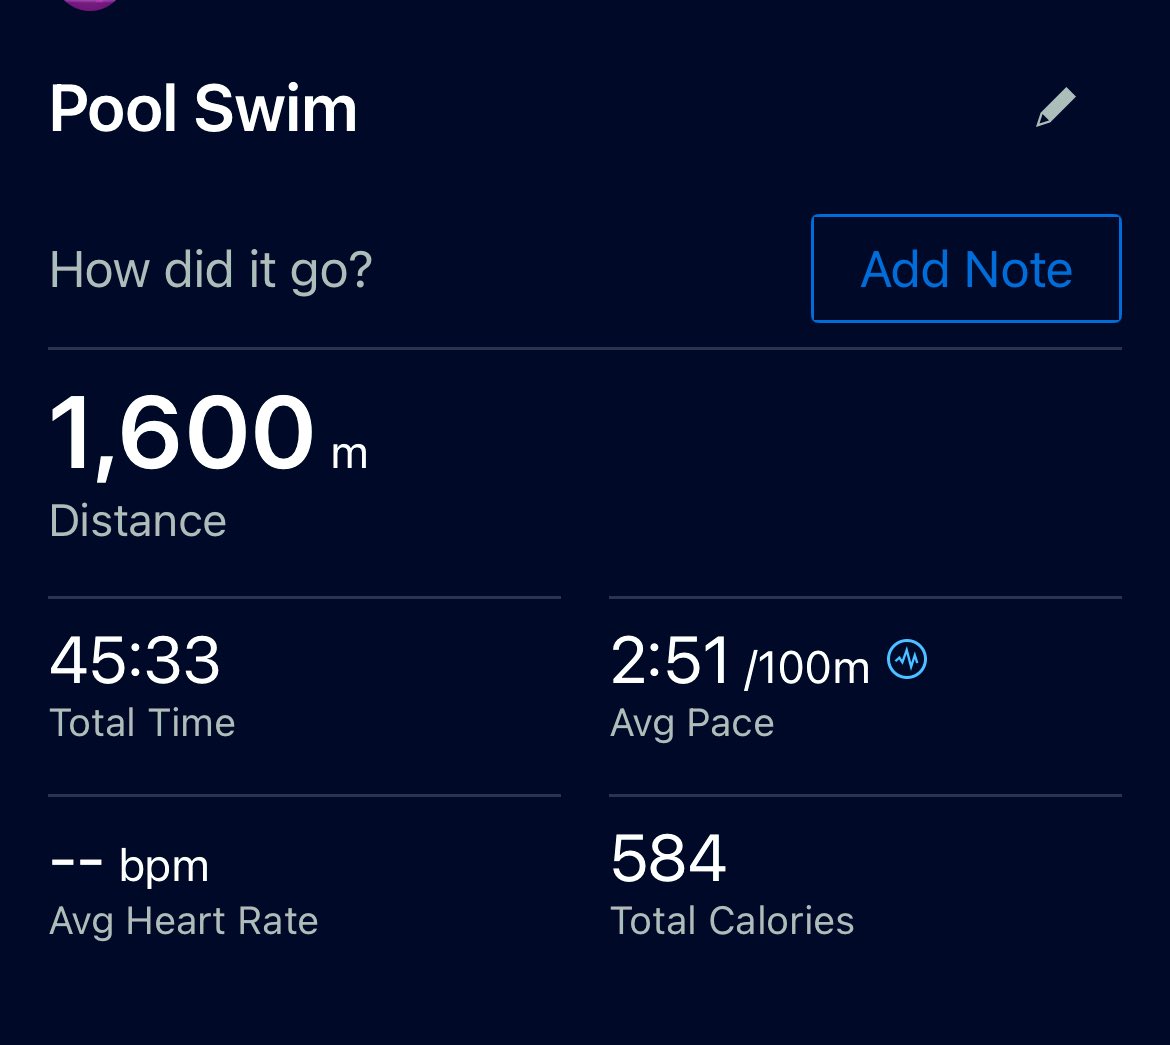 Another workout… (along with a few weights)

Decent swim this one… about a minute off PB pace but it was comfortable….so I guess that’s progress.

We go again tomorrow morning 💪⚽️

#fitness #hardwork #goals #believeinyourself #referee